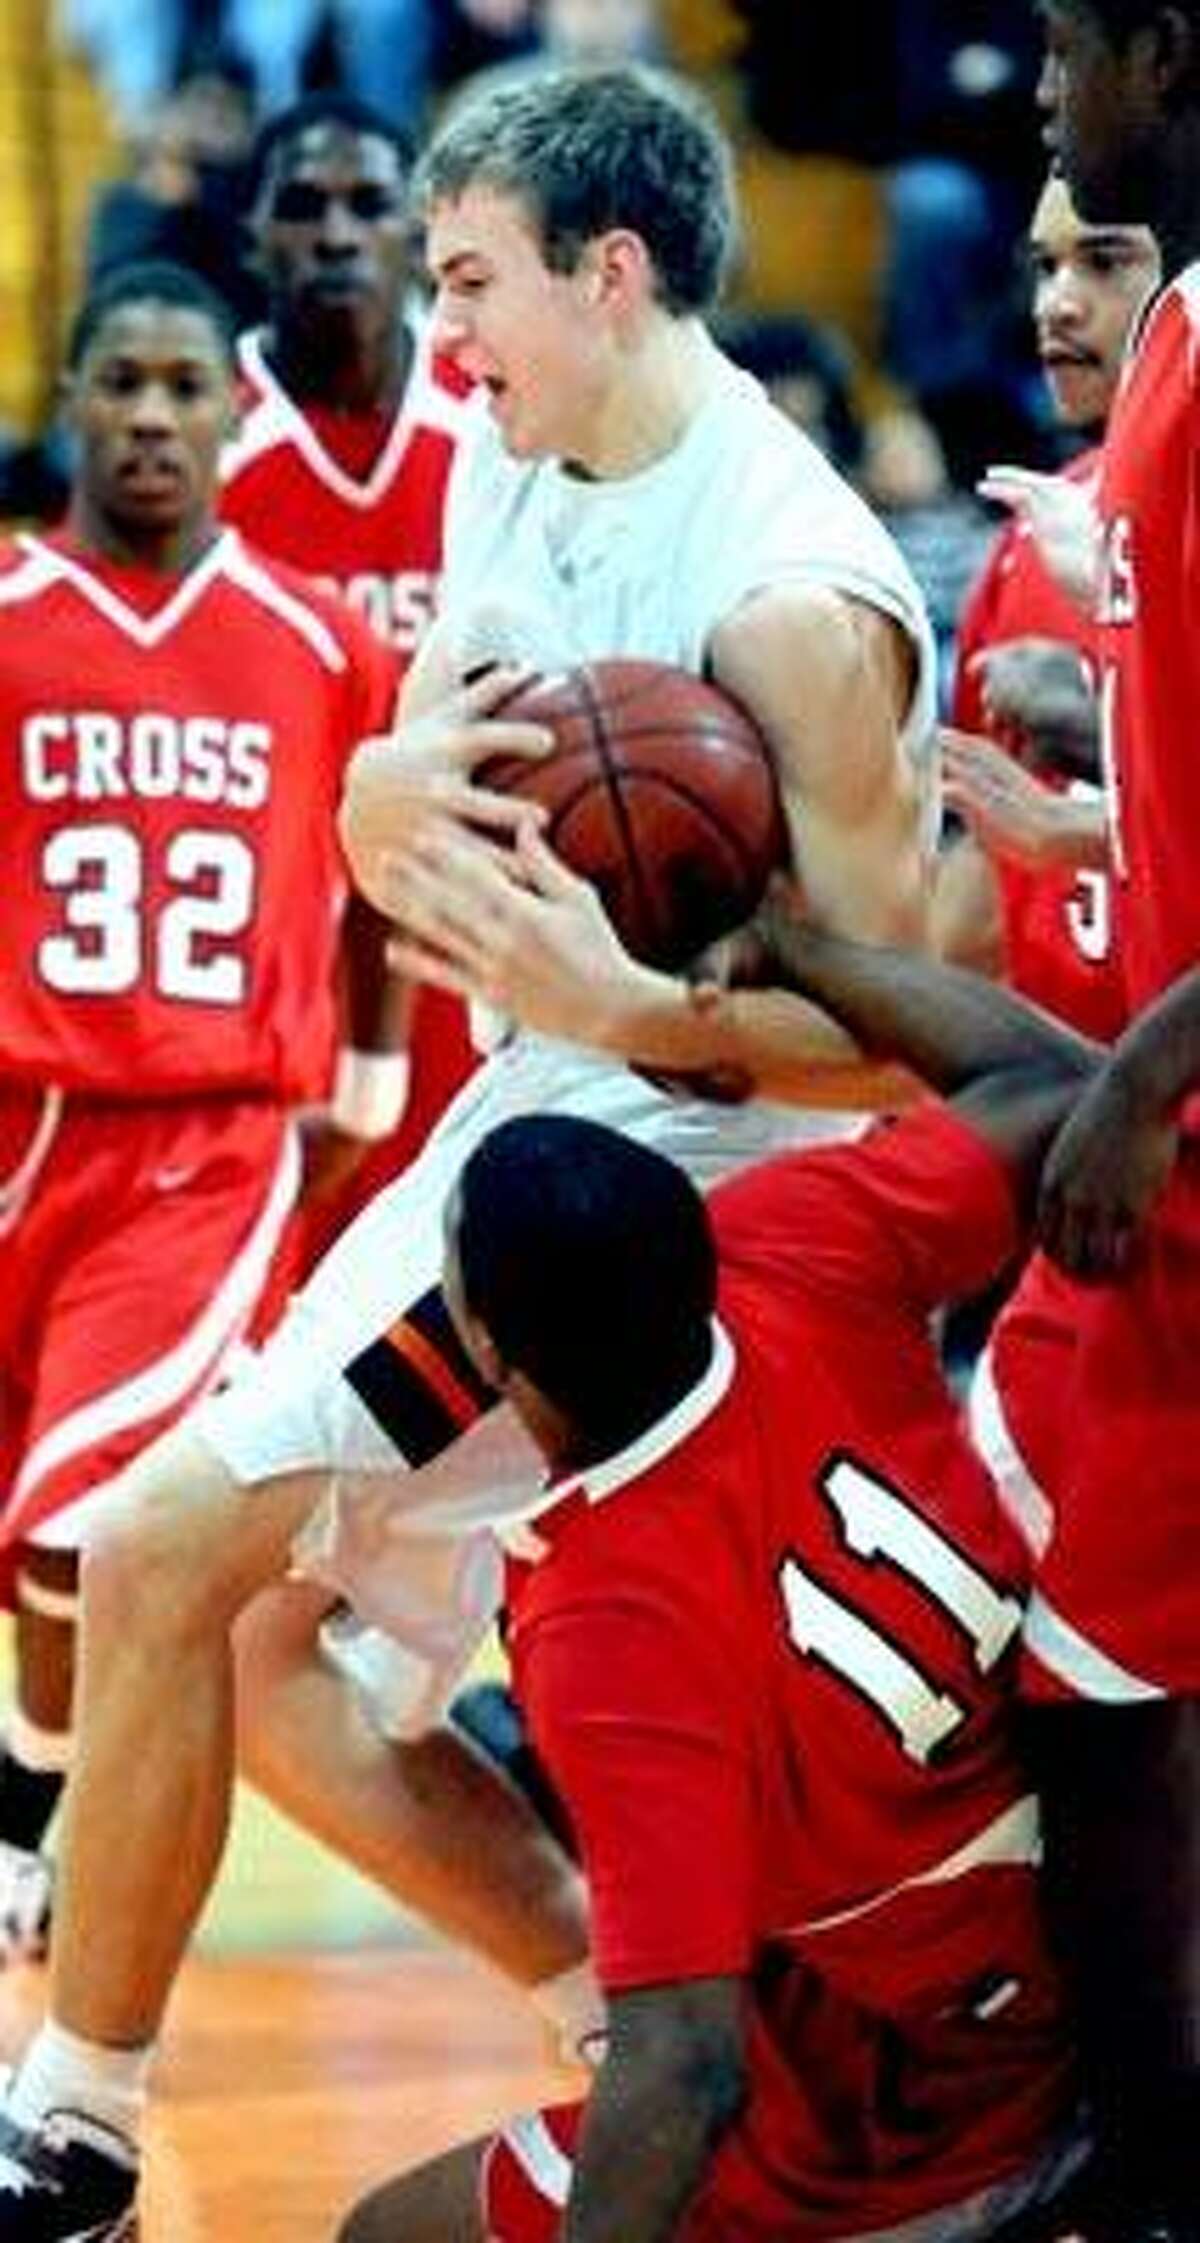 Dontay Long (bottom) of Wilbur Cross grabs the arm of Lyman Hall's Jason Dempsey in the first half on 12/15/2010.Photo by Arnold Gold/New Haven Register AG0396A